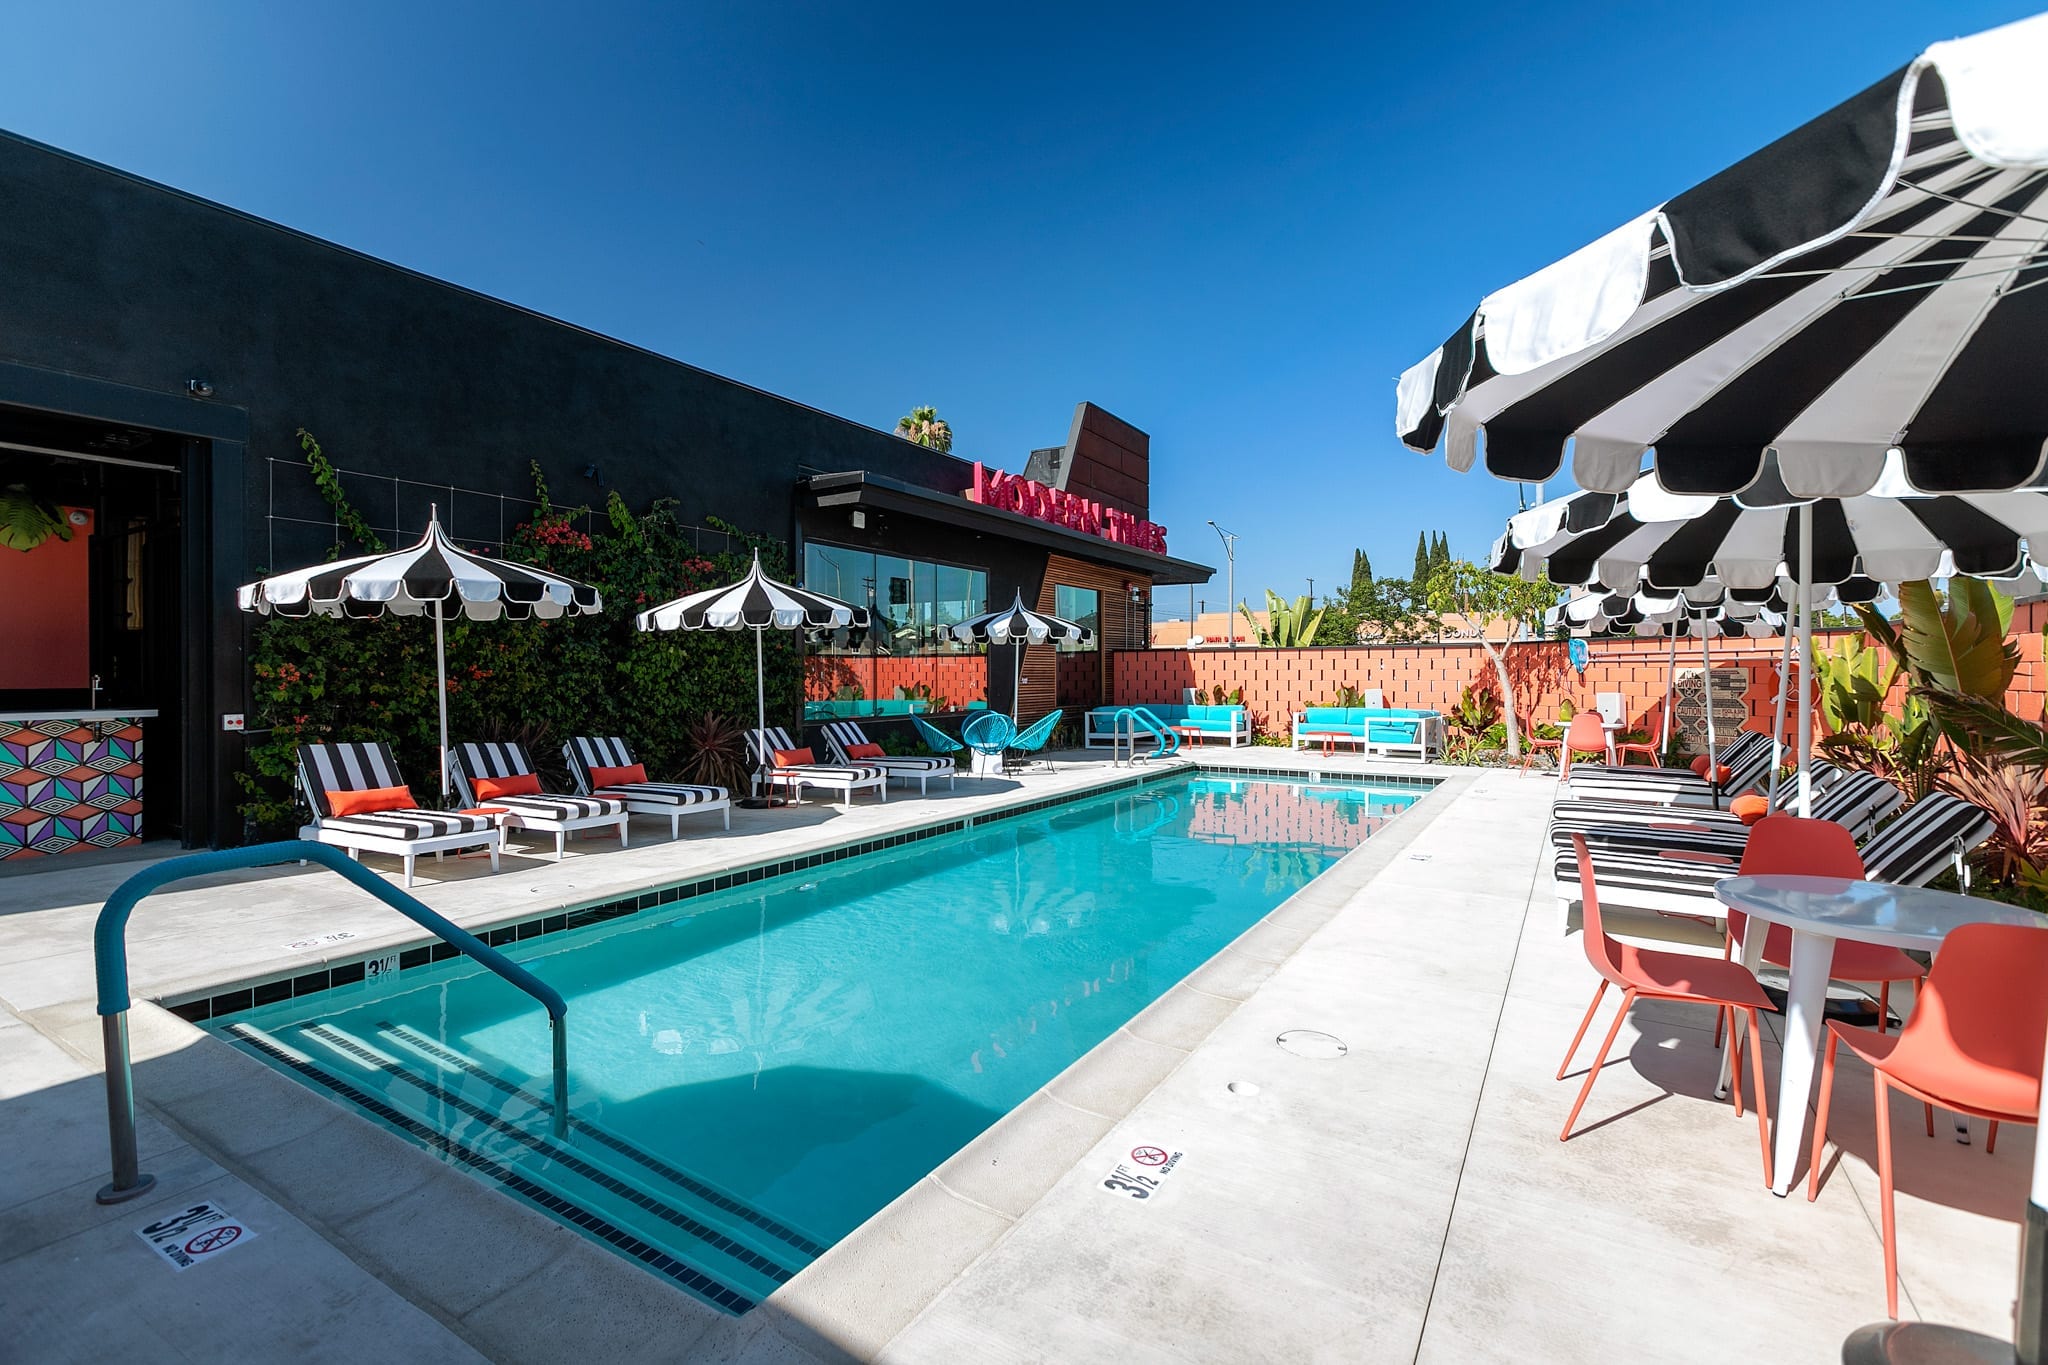 Modern Times Brewery Anaheim pool and lounge area.